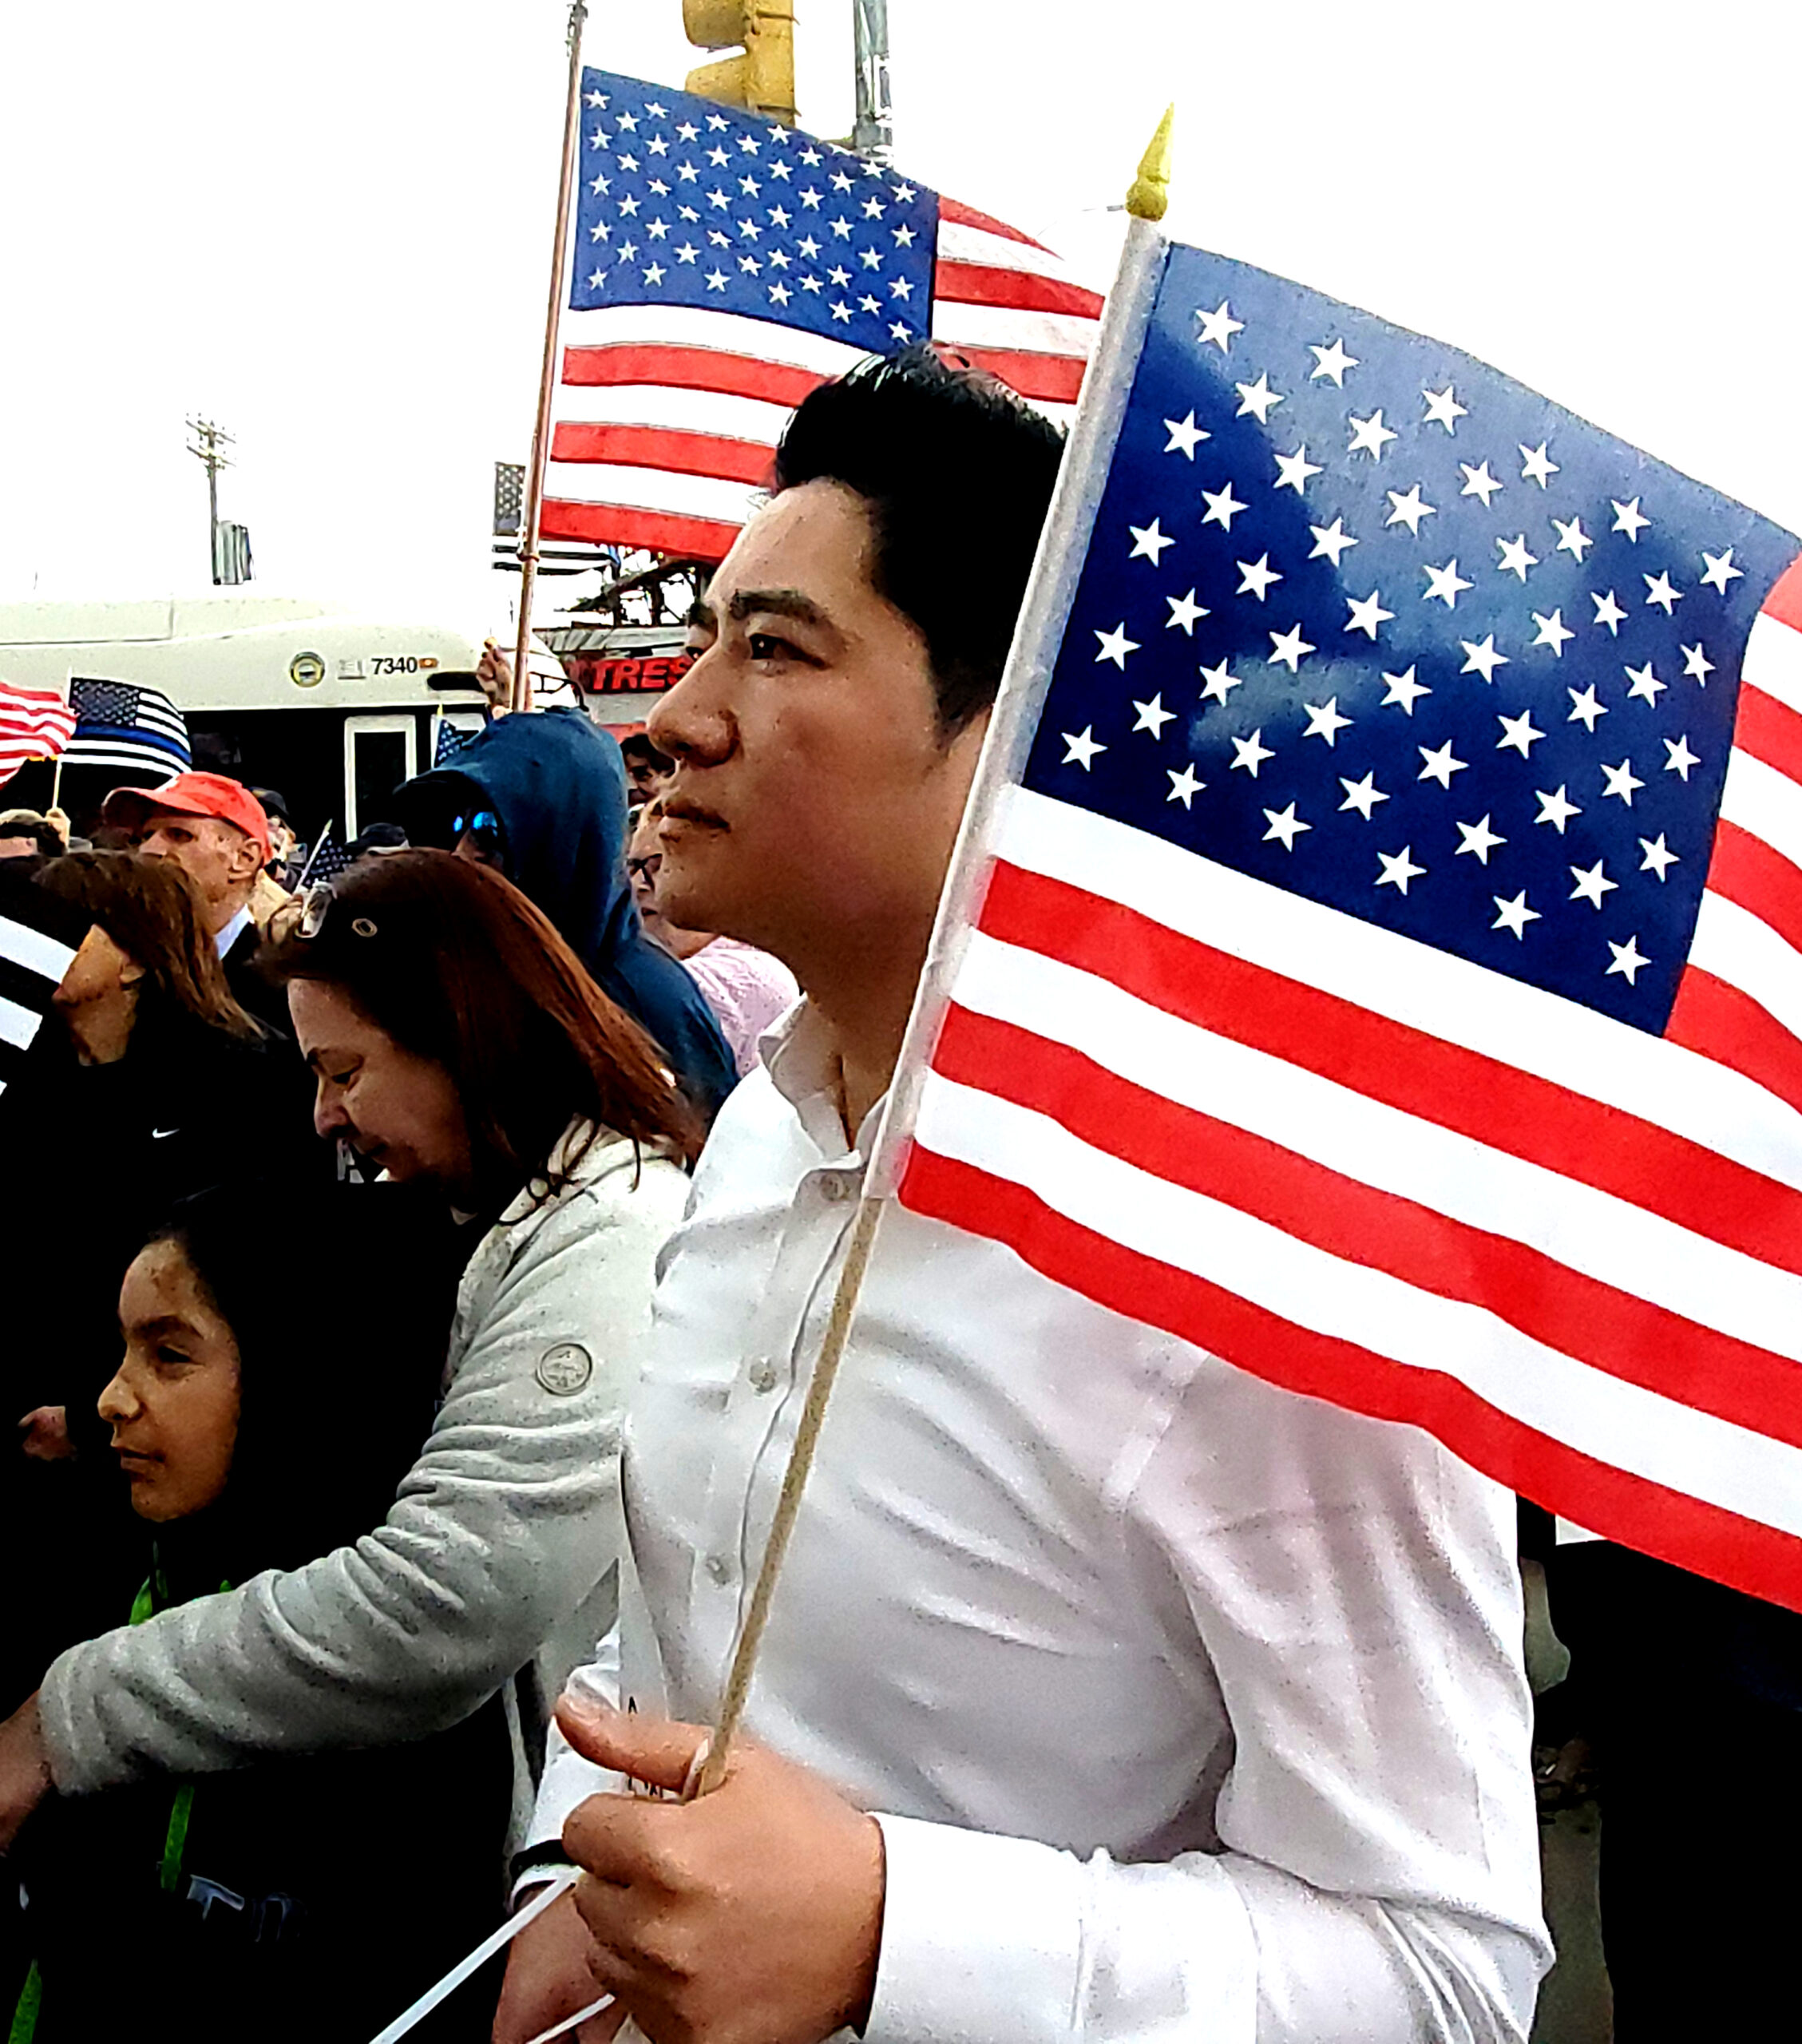 Man with flag at immigration protest